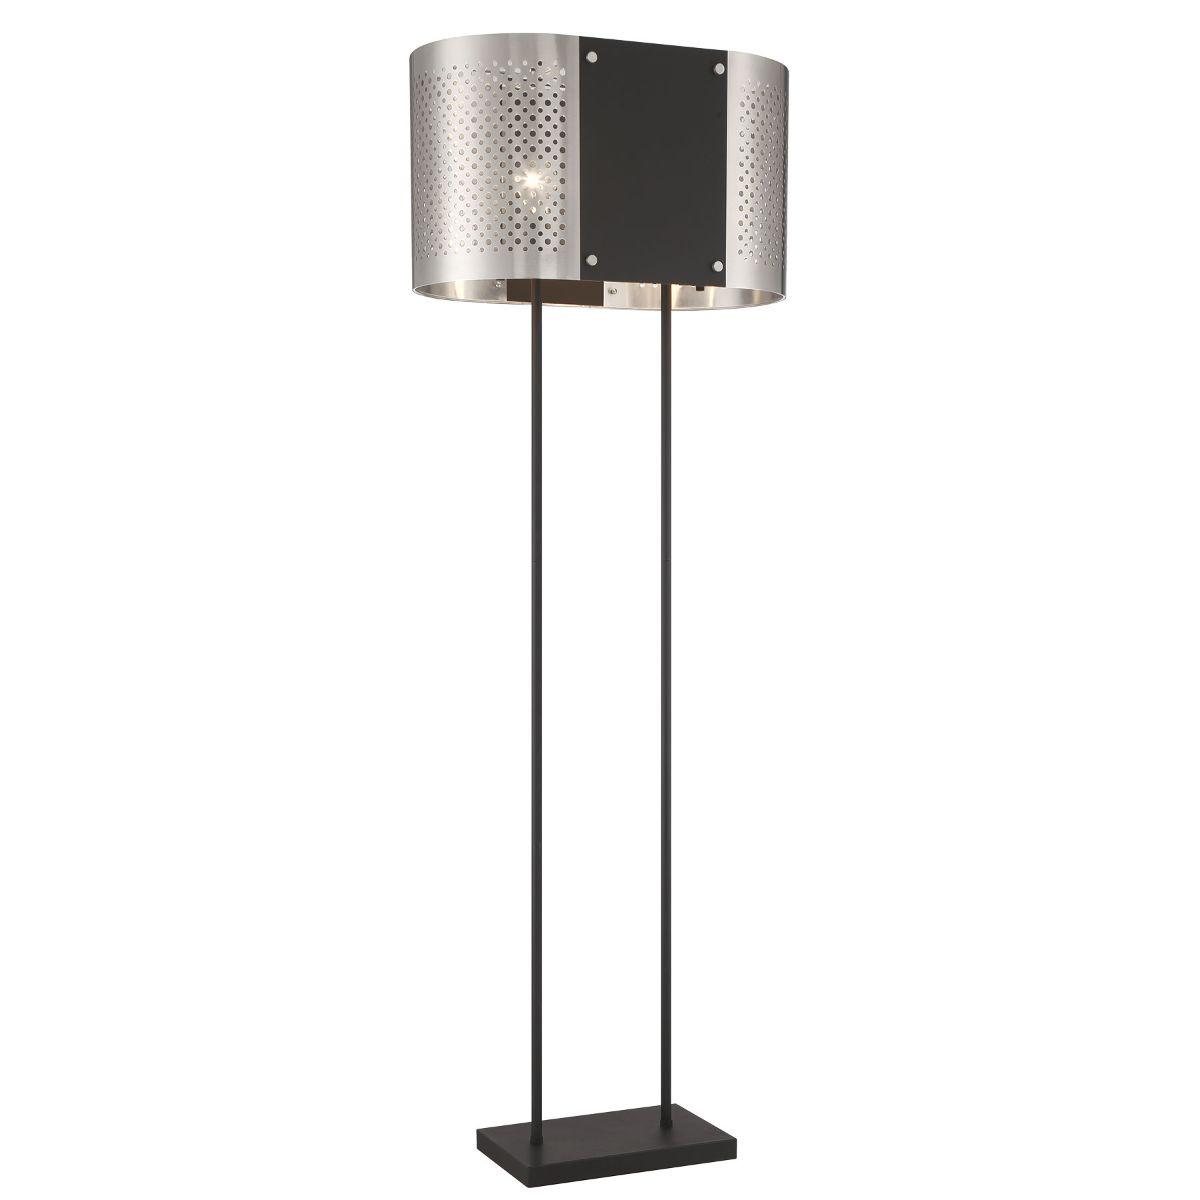 Noho 2 Lights Floor Lamp in Steel with a Coal and Brushed Nickel Finish